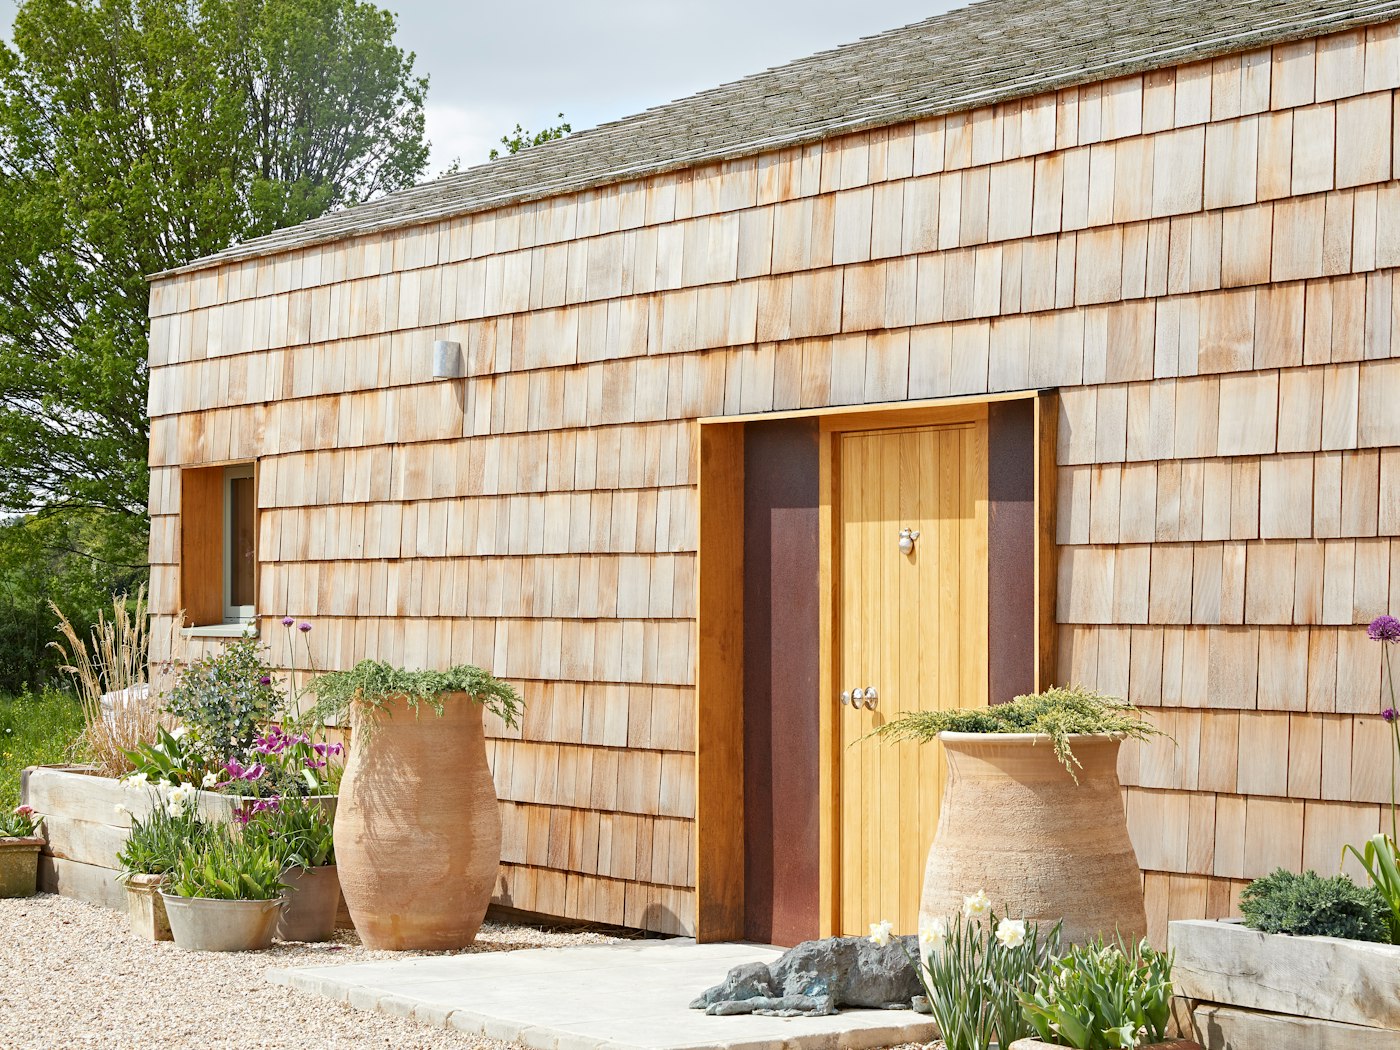 This Passivhaus build went all out on natural materials, combining cedar shingle cladding with a Passive oak front door and corten steel side panels. Oversized planters with a pop of greenery finish the look perfectly